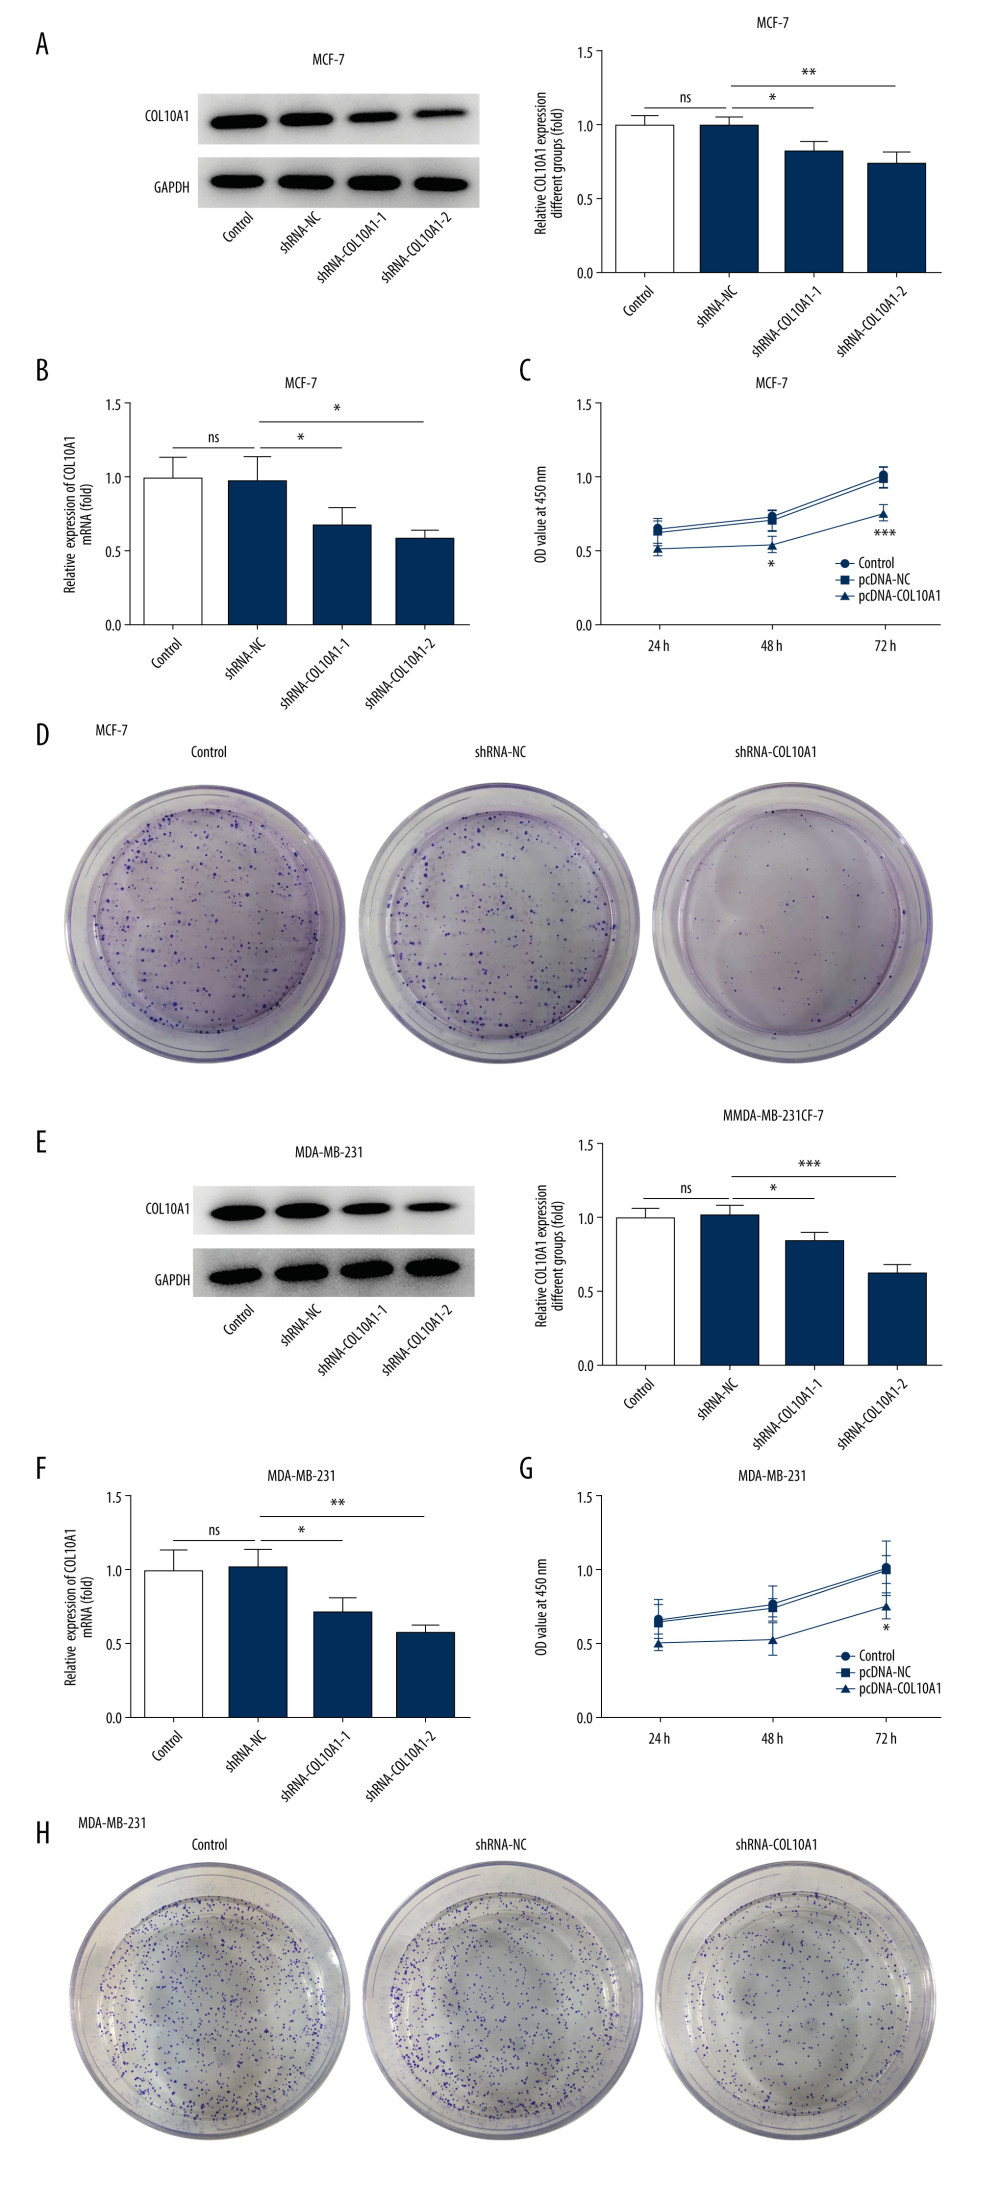 Downregulation of COL10A1 suppressed cell proliferation and clone-forming abilities of breast cancer cells. (A) Western blot analysis was performed to detect the transfection efficiency in MCF-7 cells which were transfected with shRNA-COL10A1-1 or shRNA-COL10A1-2. (B) RT-qPCR analysis was performed to detect the transfection efficiency in MCF-7 cells which were transfected with shRNA-COL10A1-1 or shRNA-COL10A1-2. (C) CCK-8 assay was applied to explore the effect of silenced COL10A1 on cell viability of MCF-7. (D) Colony formation assay was applied to explore the effect of silenced COL10A1 on clone-forming ability of MCF-7. (E) Western blot analysis was performed to detect the transfection efficiency in MDA-MB-231 cells which were transfected with shRNA-COL10A1-1 or shRNA-COL10A1-2. (F) RT-qPCR analysis was performed to detect the transfection efficiency in MDA-MB-231 cells which were transfected with shRNA-COL10A1-1 or shRNA-COL10A1-2. (G) CCK-8 assay was applied to explore the effect of silenced COL10A1 on cell viability of MDA-MB-231. (H). Colony formation assay was used to explore the effect of silenced COL10A1 on clone-forming ability of MDA-MB-231. * P<0.05, ** P<0.01, *** P<0.001.